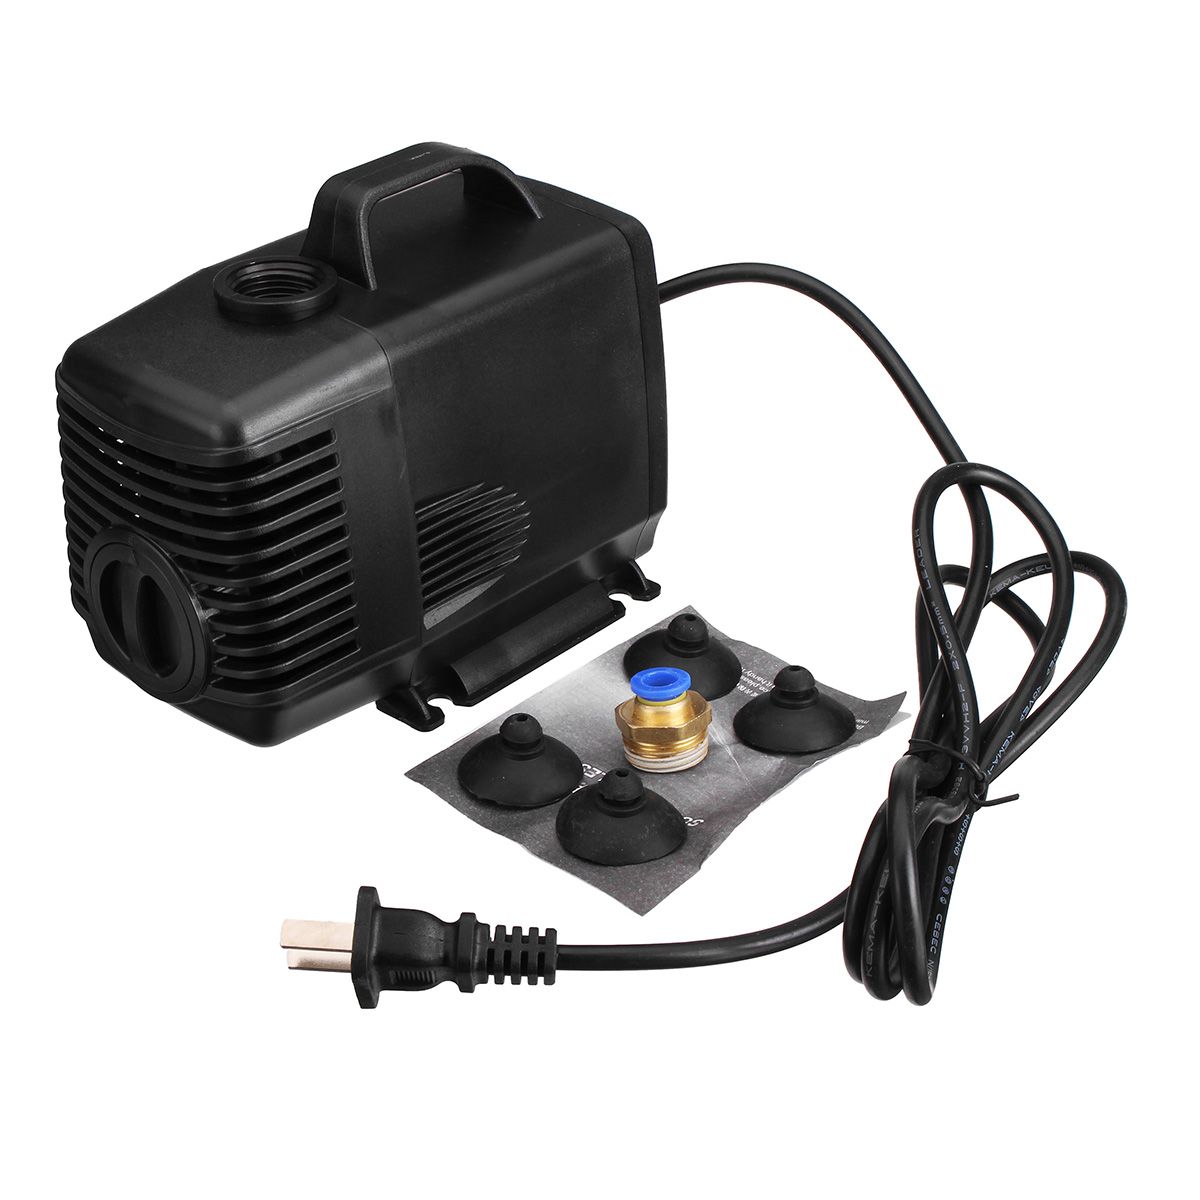 80W-35m-220-240V-Cooling-Water-Pump-For-Engraving-Machine-CNC-Milling-Tools-Kit-1407002